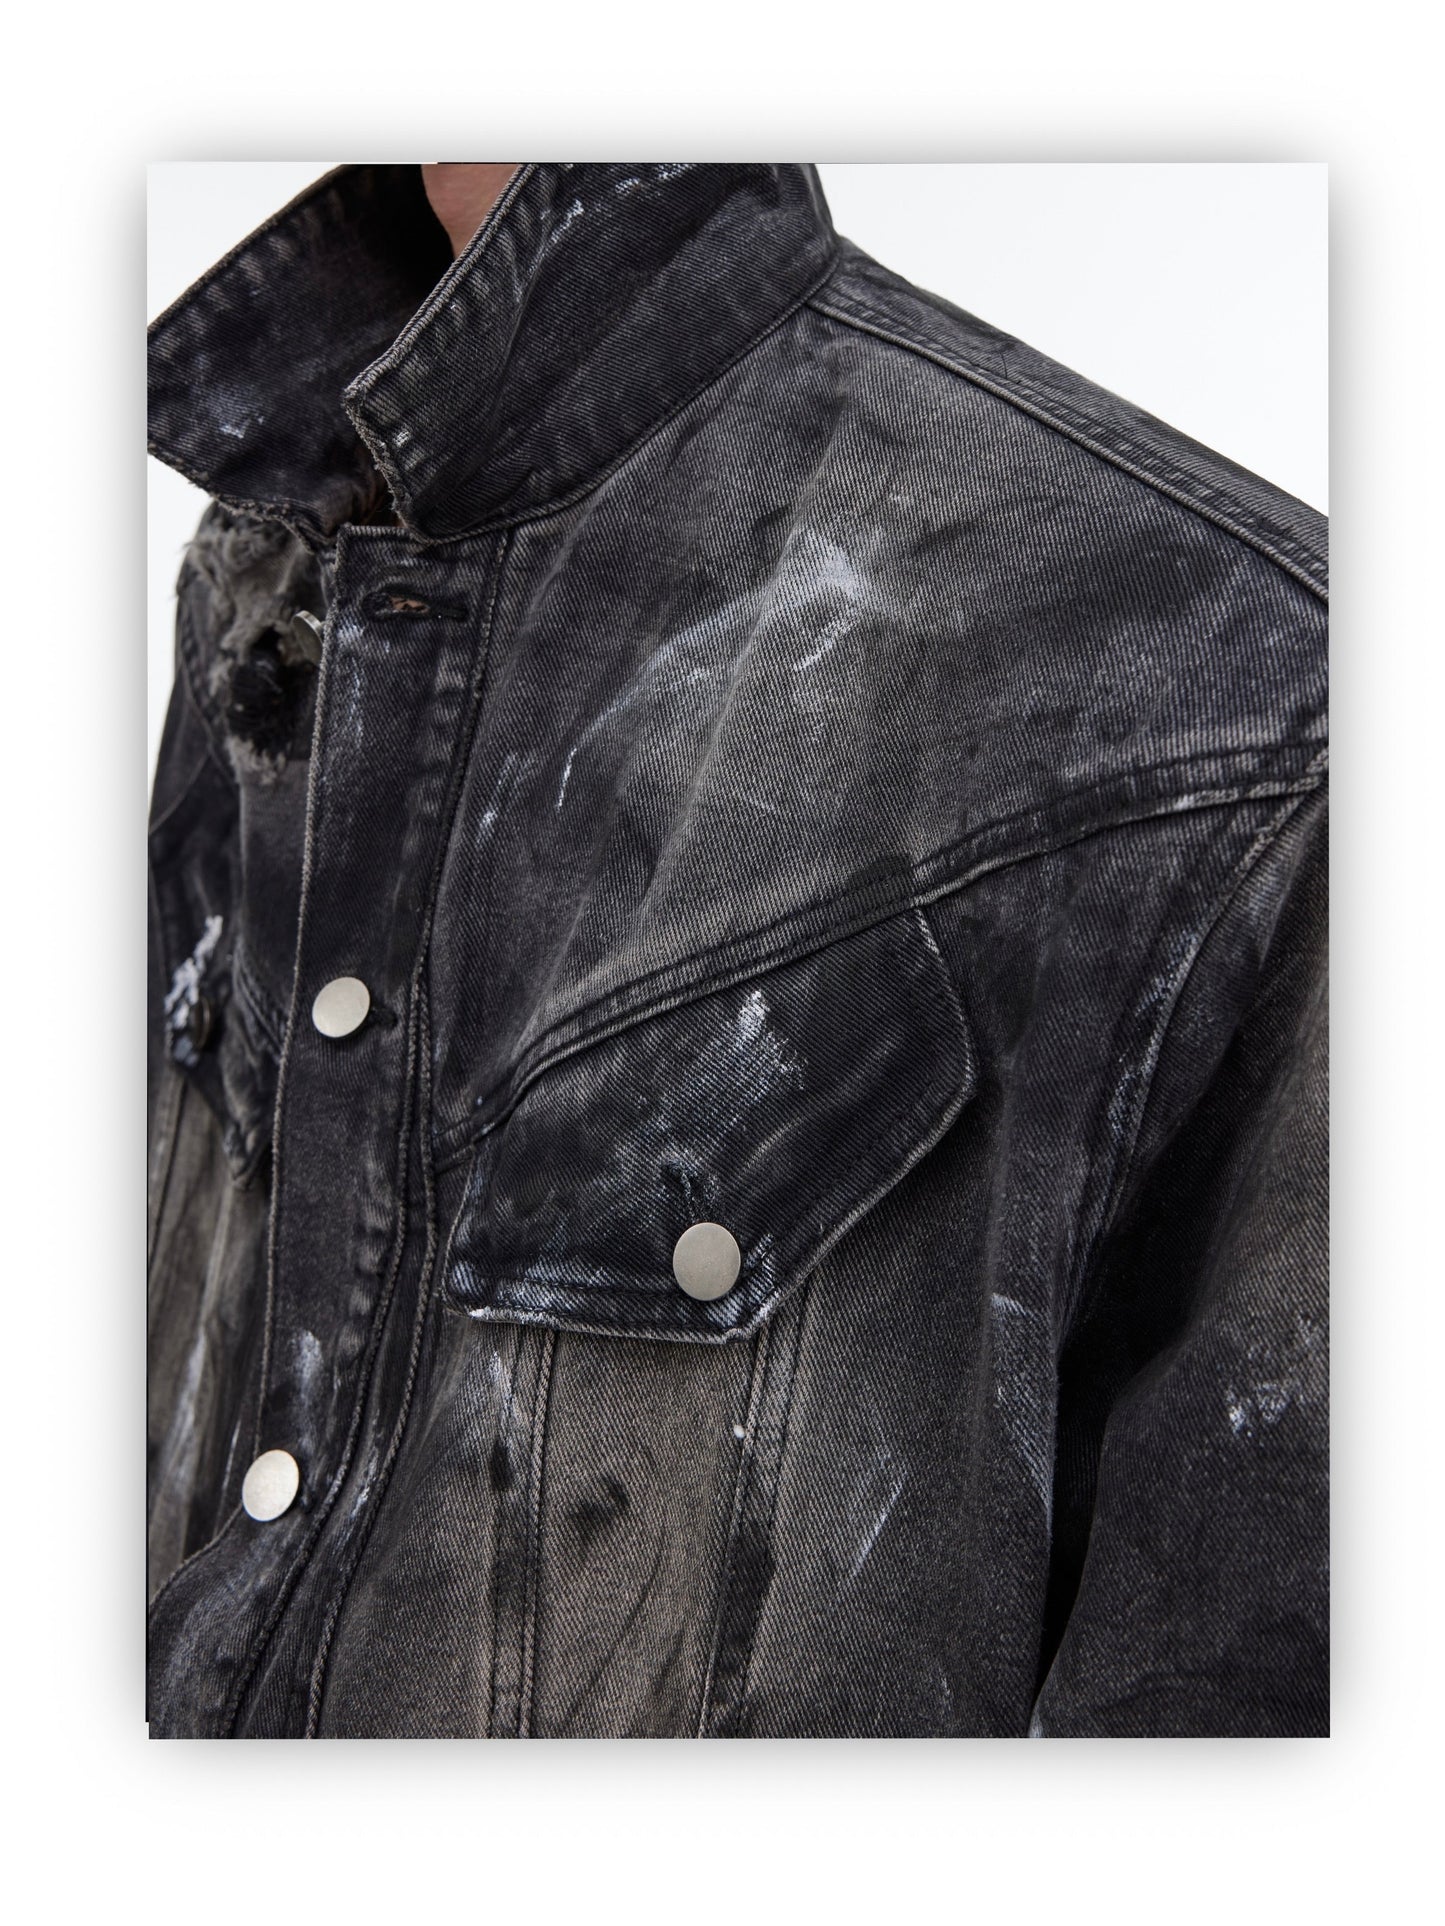 Heavy Industry Hand-painted Distressed Denim Jacket | ARGUE CULTURE Collection [H436]